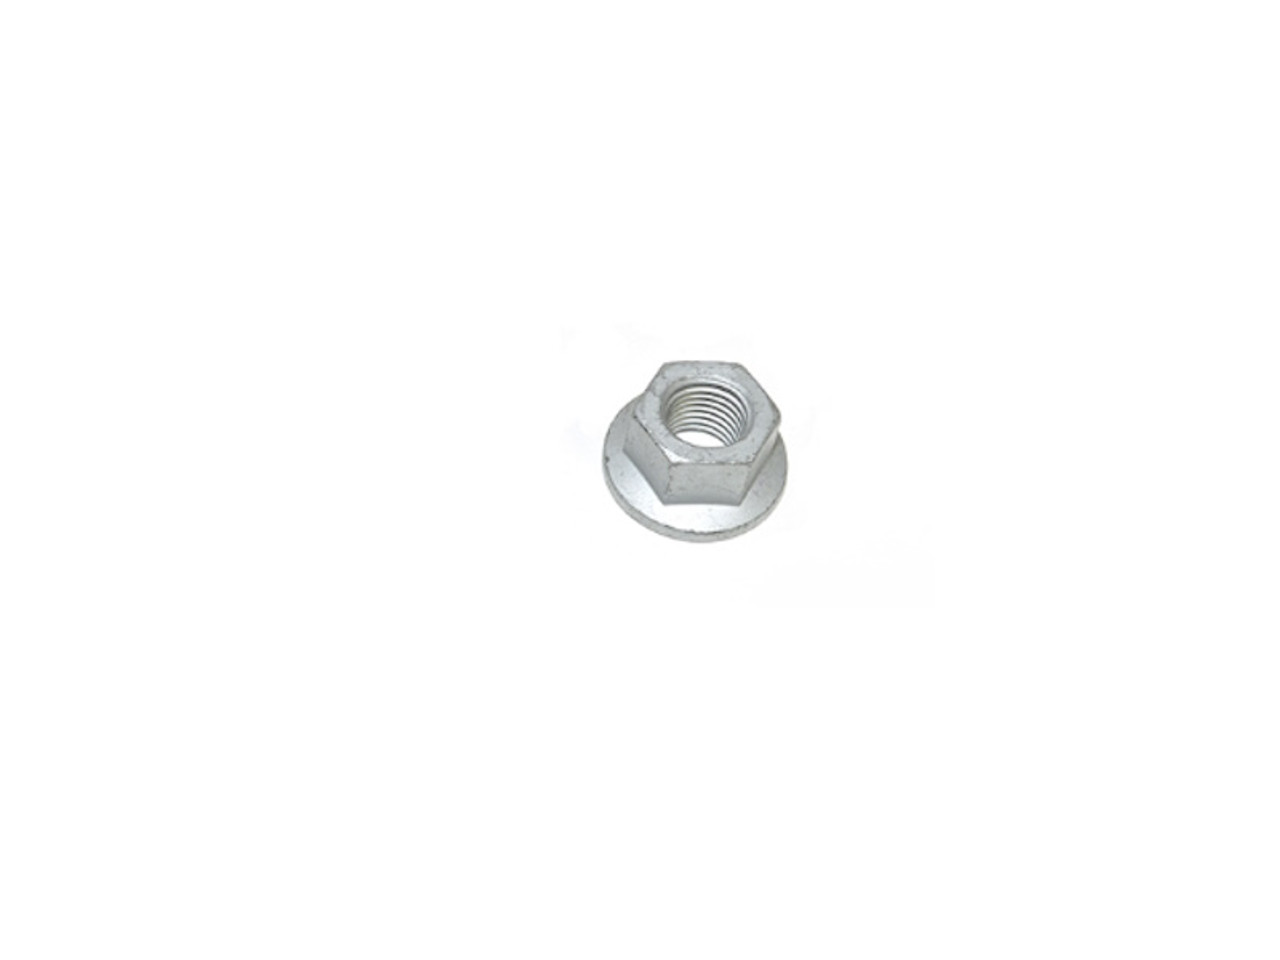 Genuine Discovery 3 and 4 Front Lower Arm Nut - FX116056